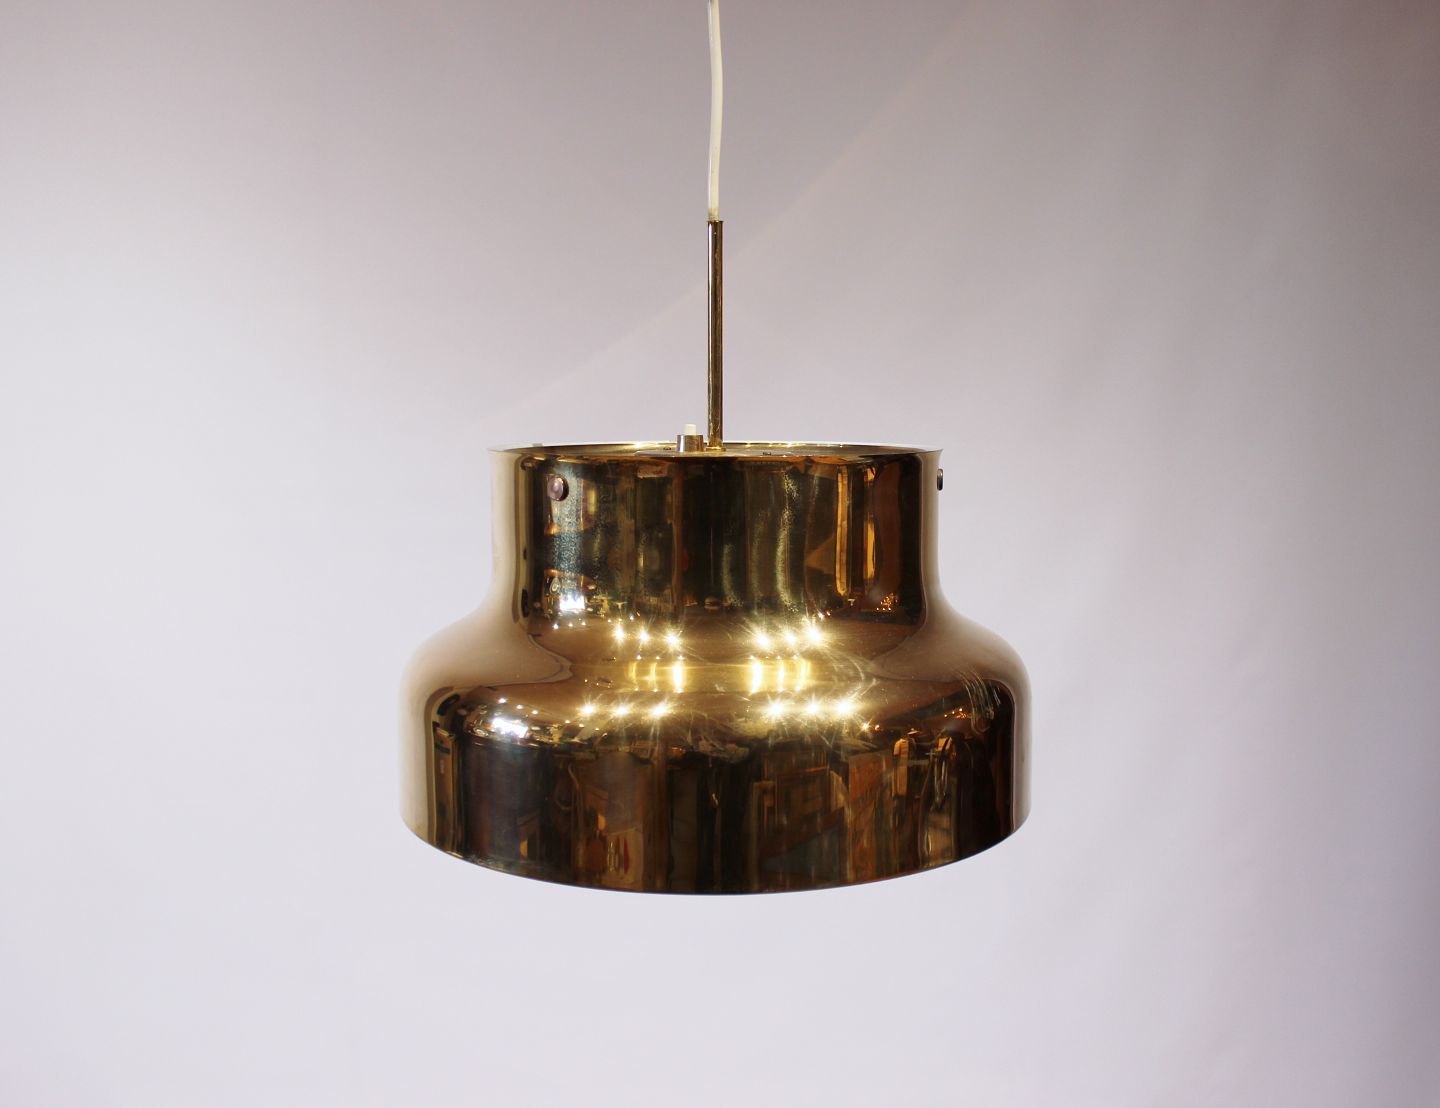 KAD ringen - "Bumling" pendant in brass designed by Anders in 1968 and manufactured b - pendant in brass designed by Anders Pehrson in 1968 and manufactured